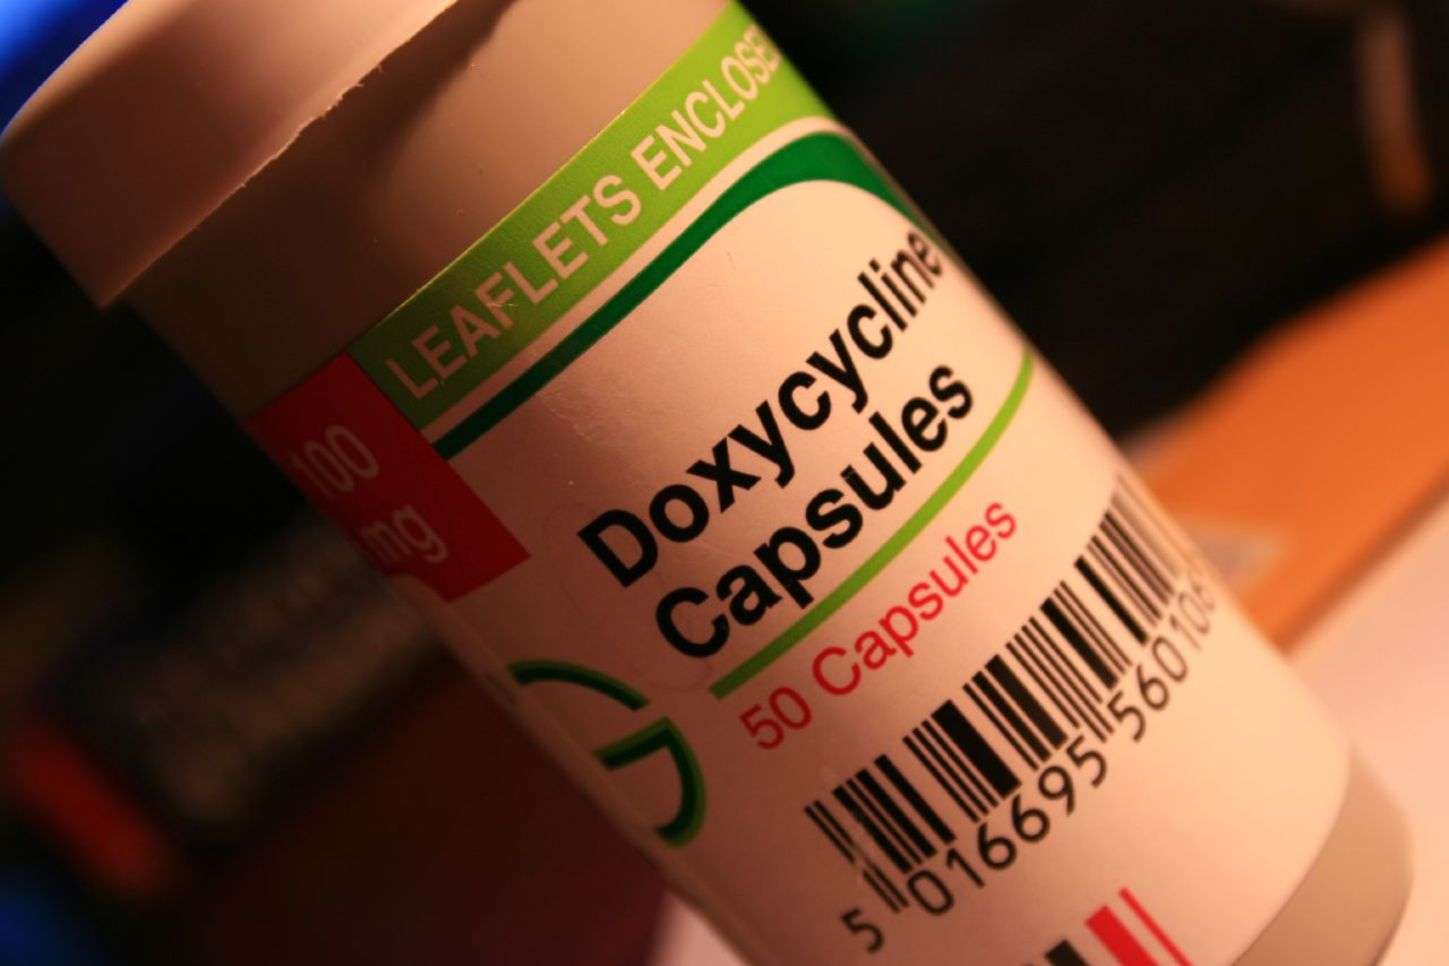 Weekly Dose: doxycycline treats a host of human plagues ...